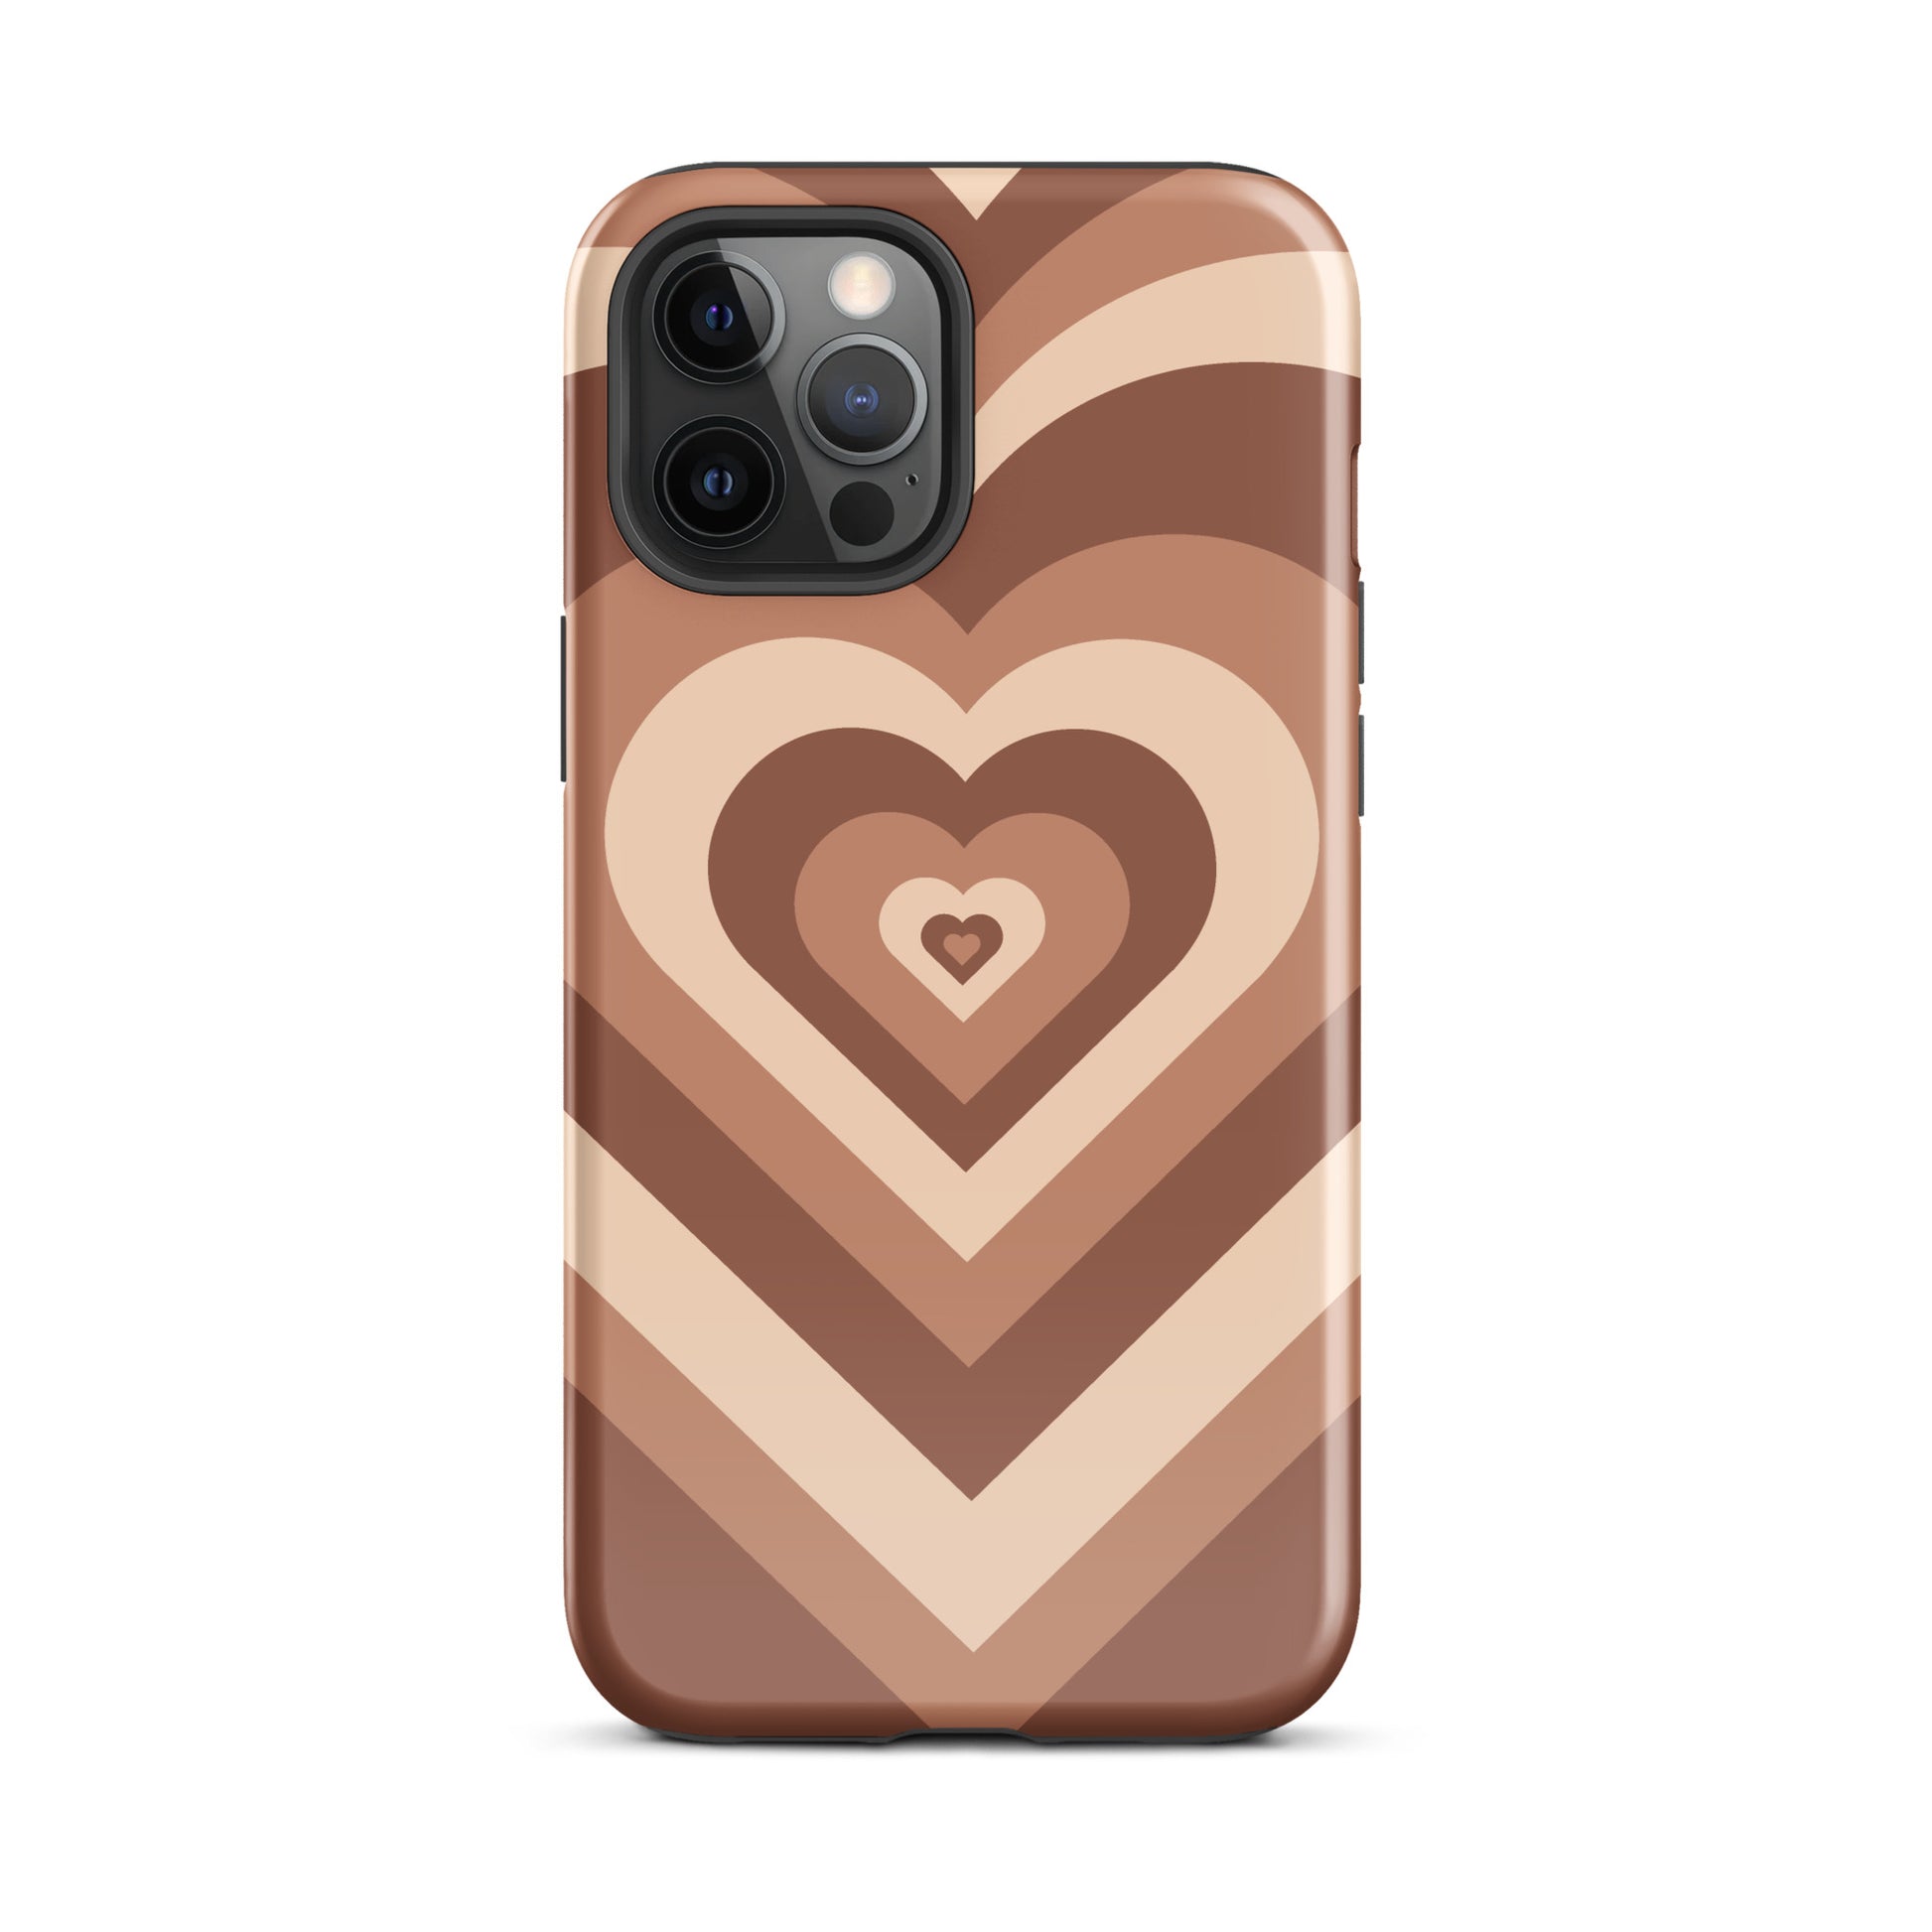 Choco Hearts iPhone Case iPhone 12 Pro Max Glossy